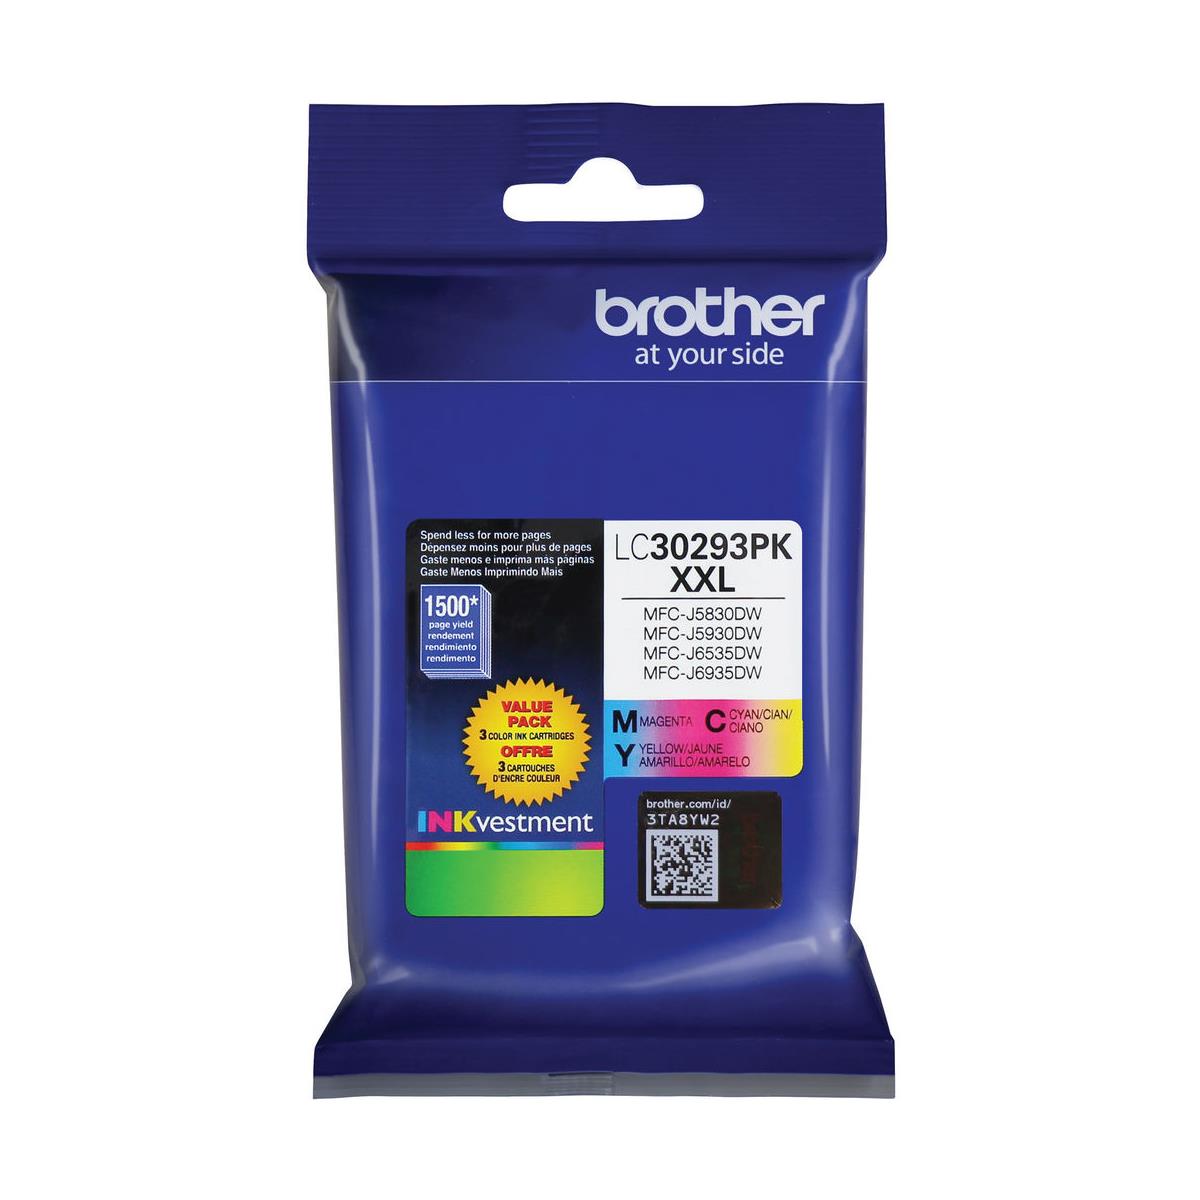 Image of Brother Cyan/Magenta/Yellow Super High Yield INKvestment Ink Cartridge